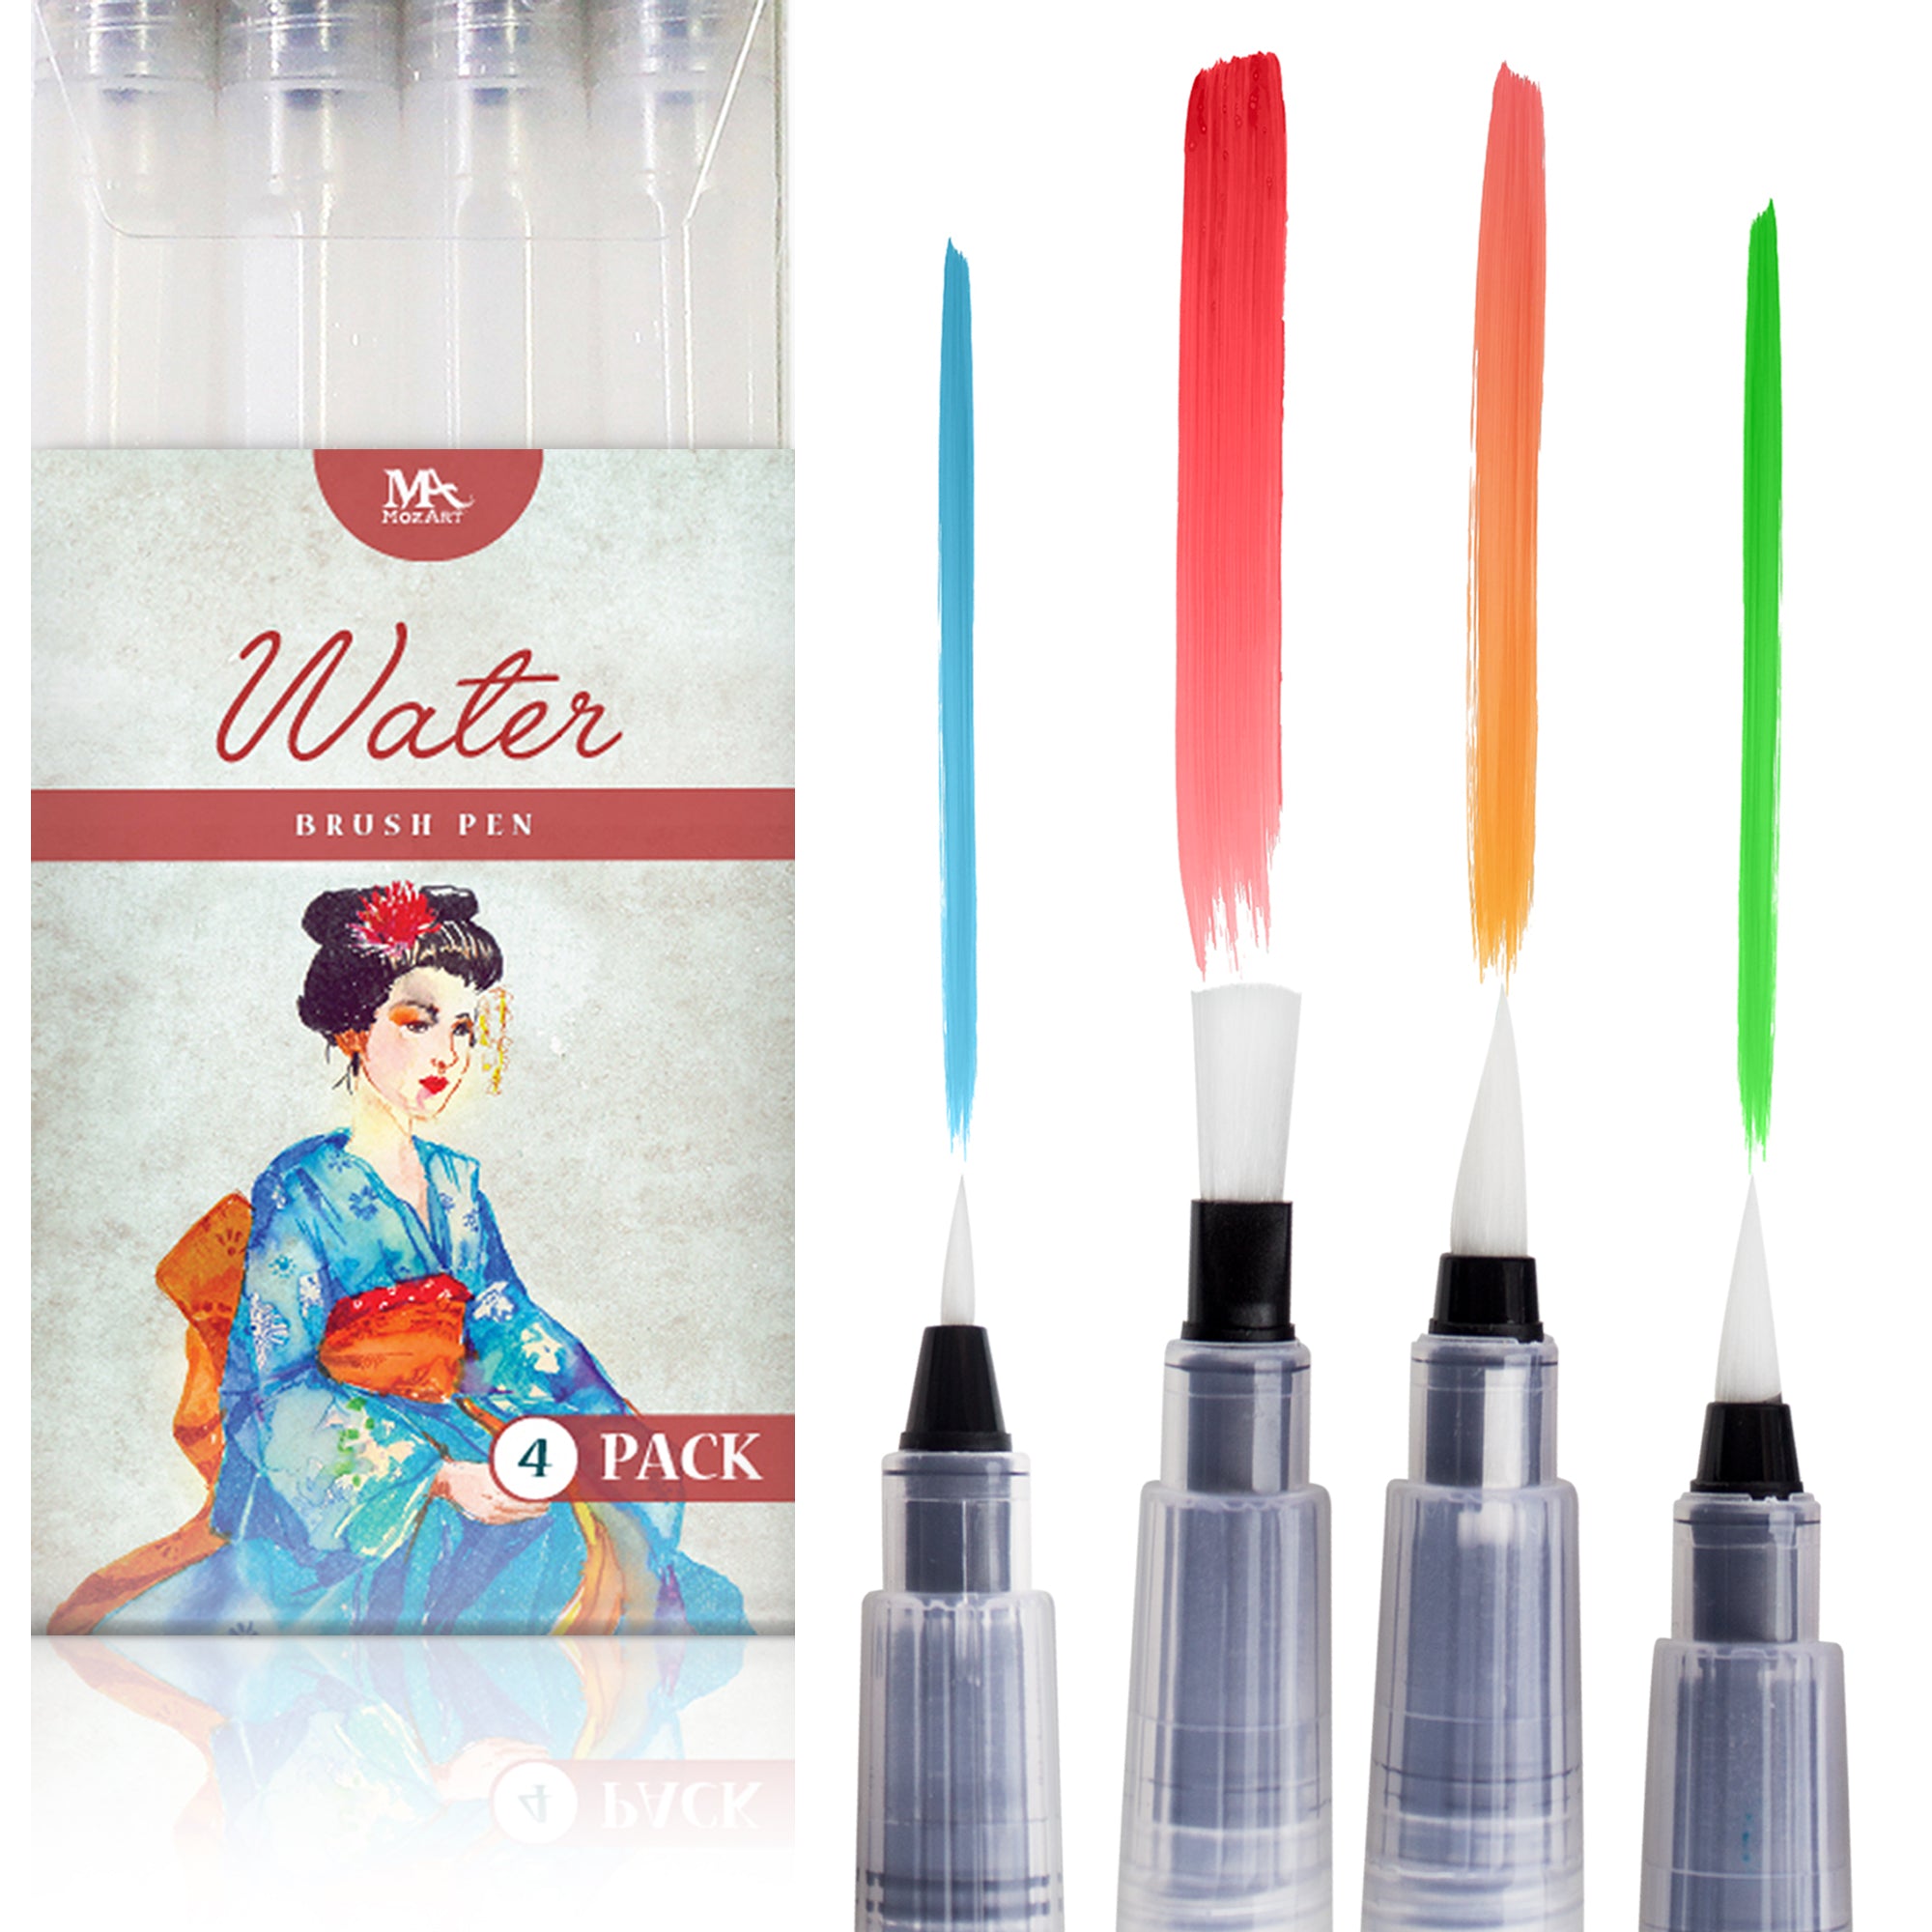 6 Water Brush Pens - Nylon Bristle Tips, Double Pack of Both Flat and Round  Shaped Tips in 3 Sizes Each, Water Fillable Self-Moistening for